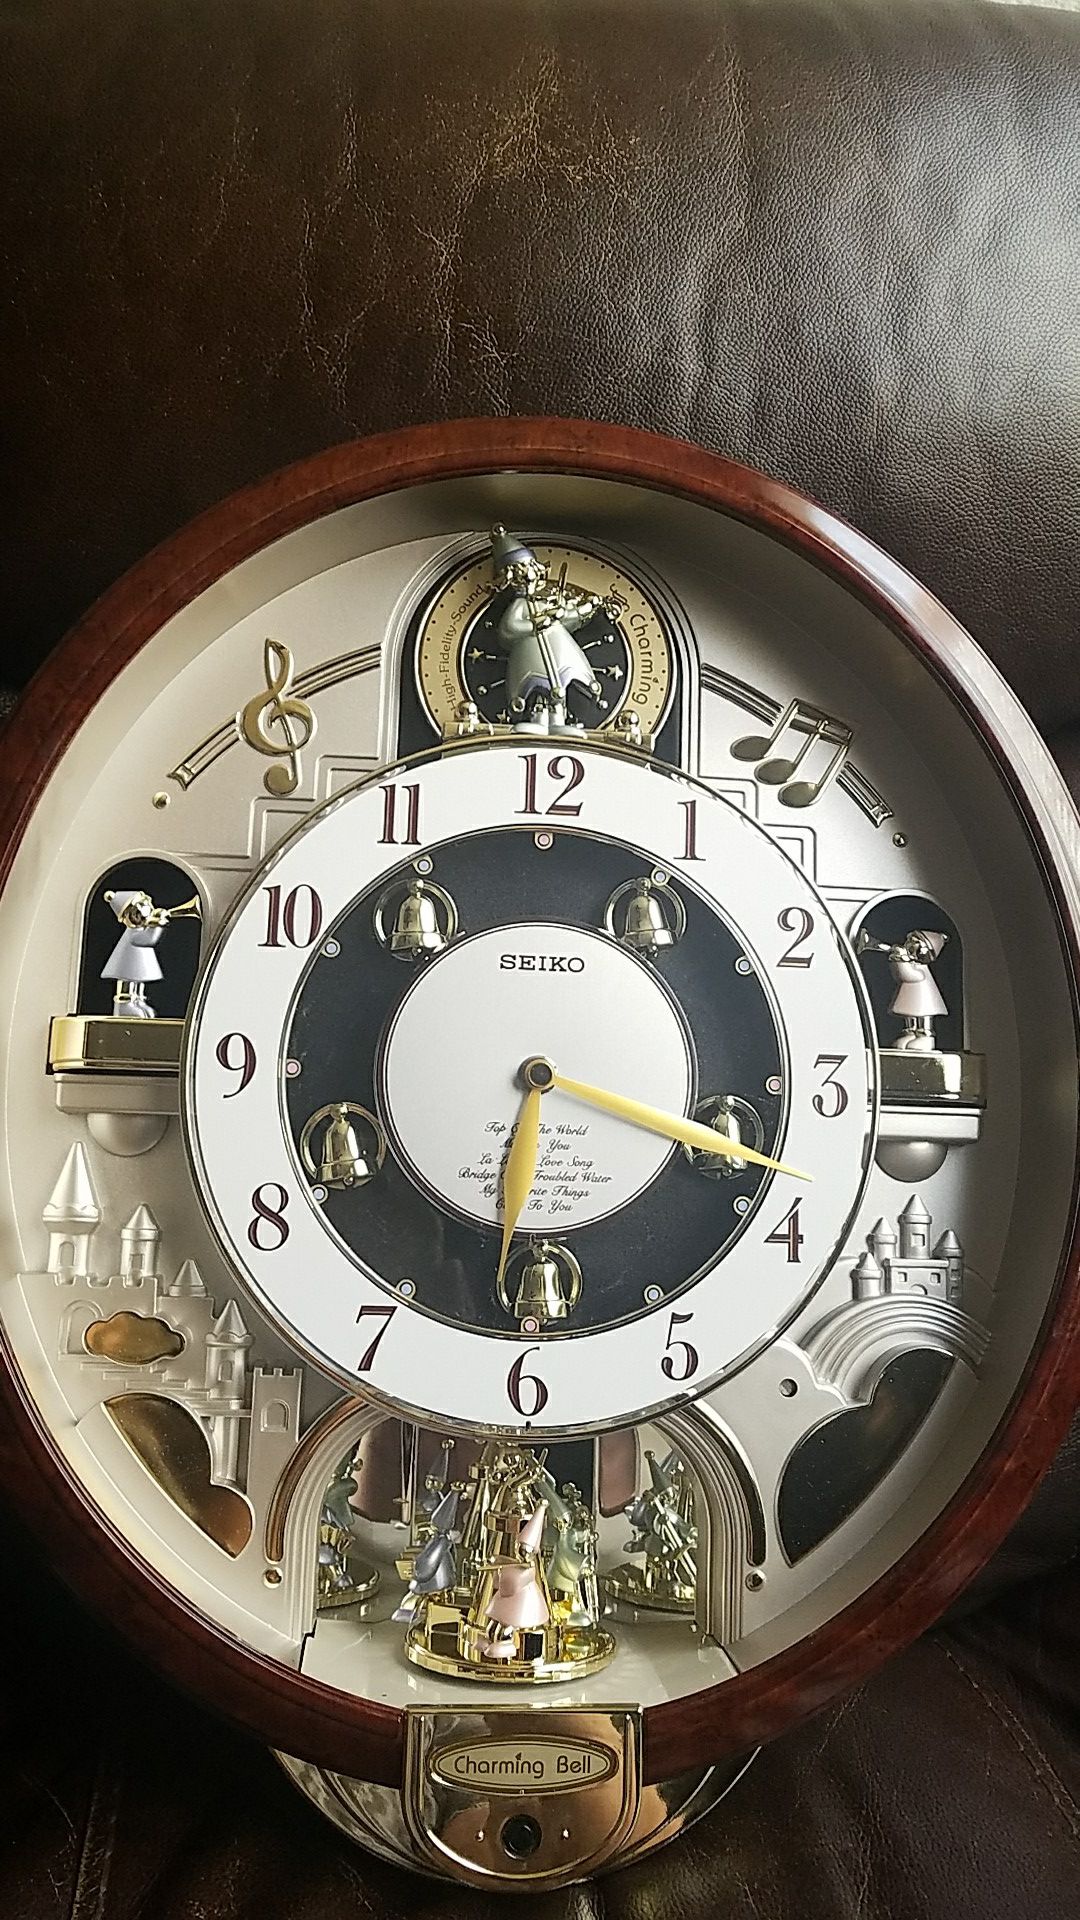 Seiko Charming Bell Wall Clock for Sale in Las Vegas, NV - OfferUp